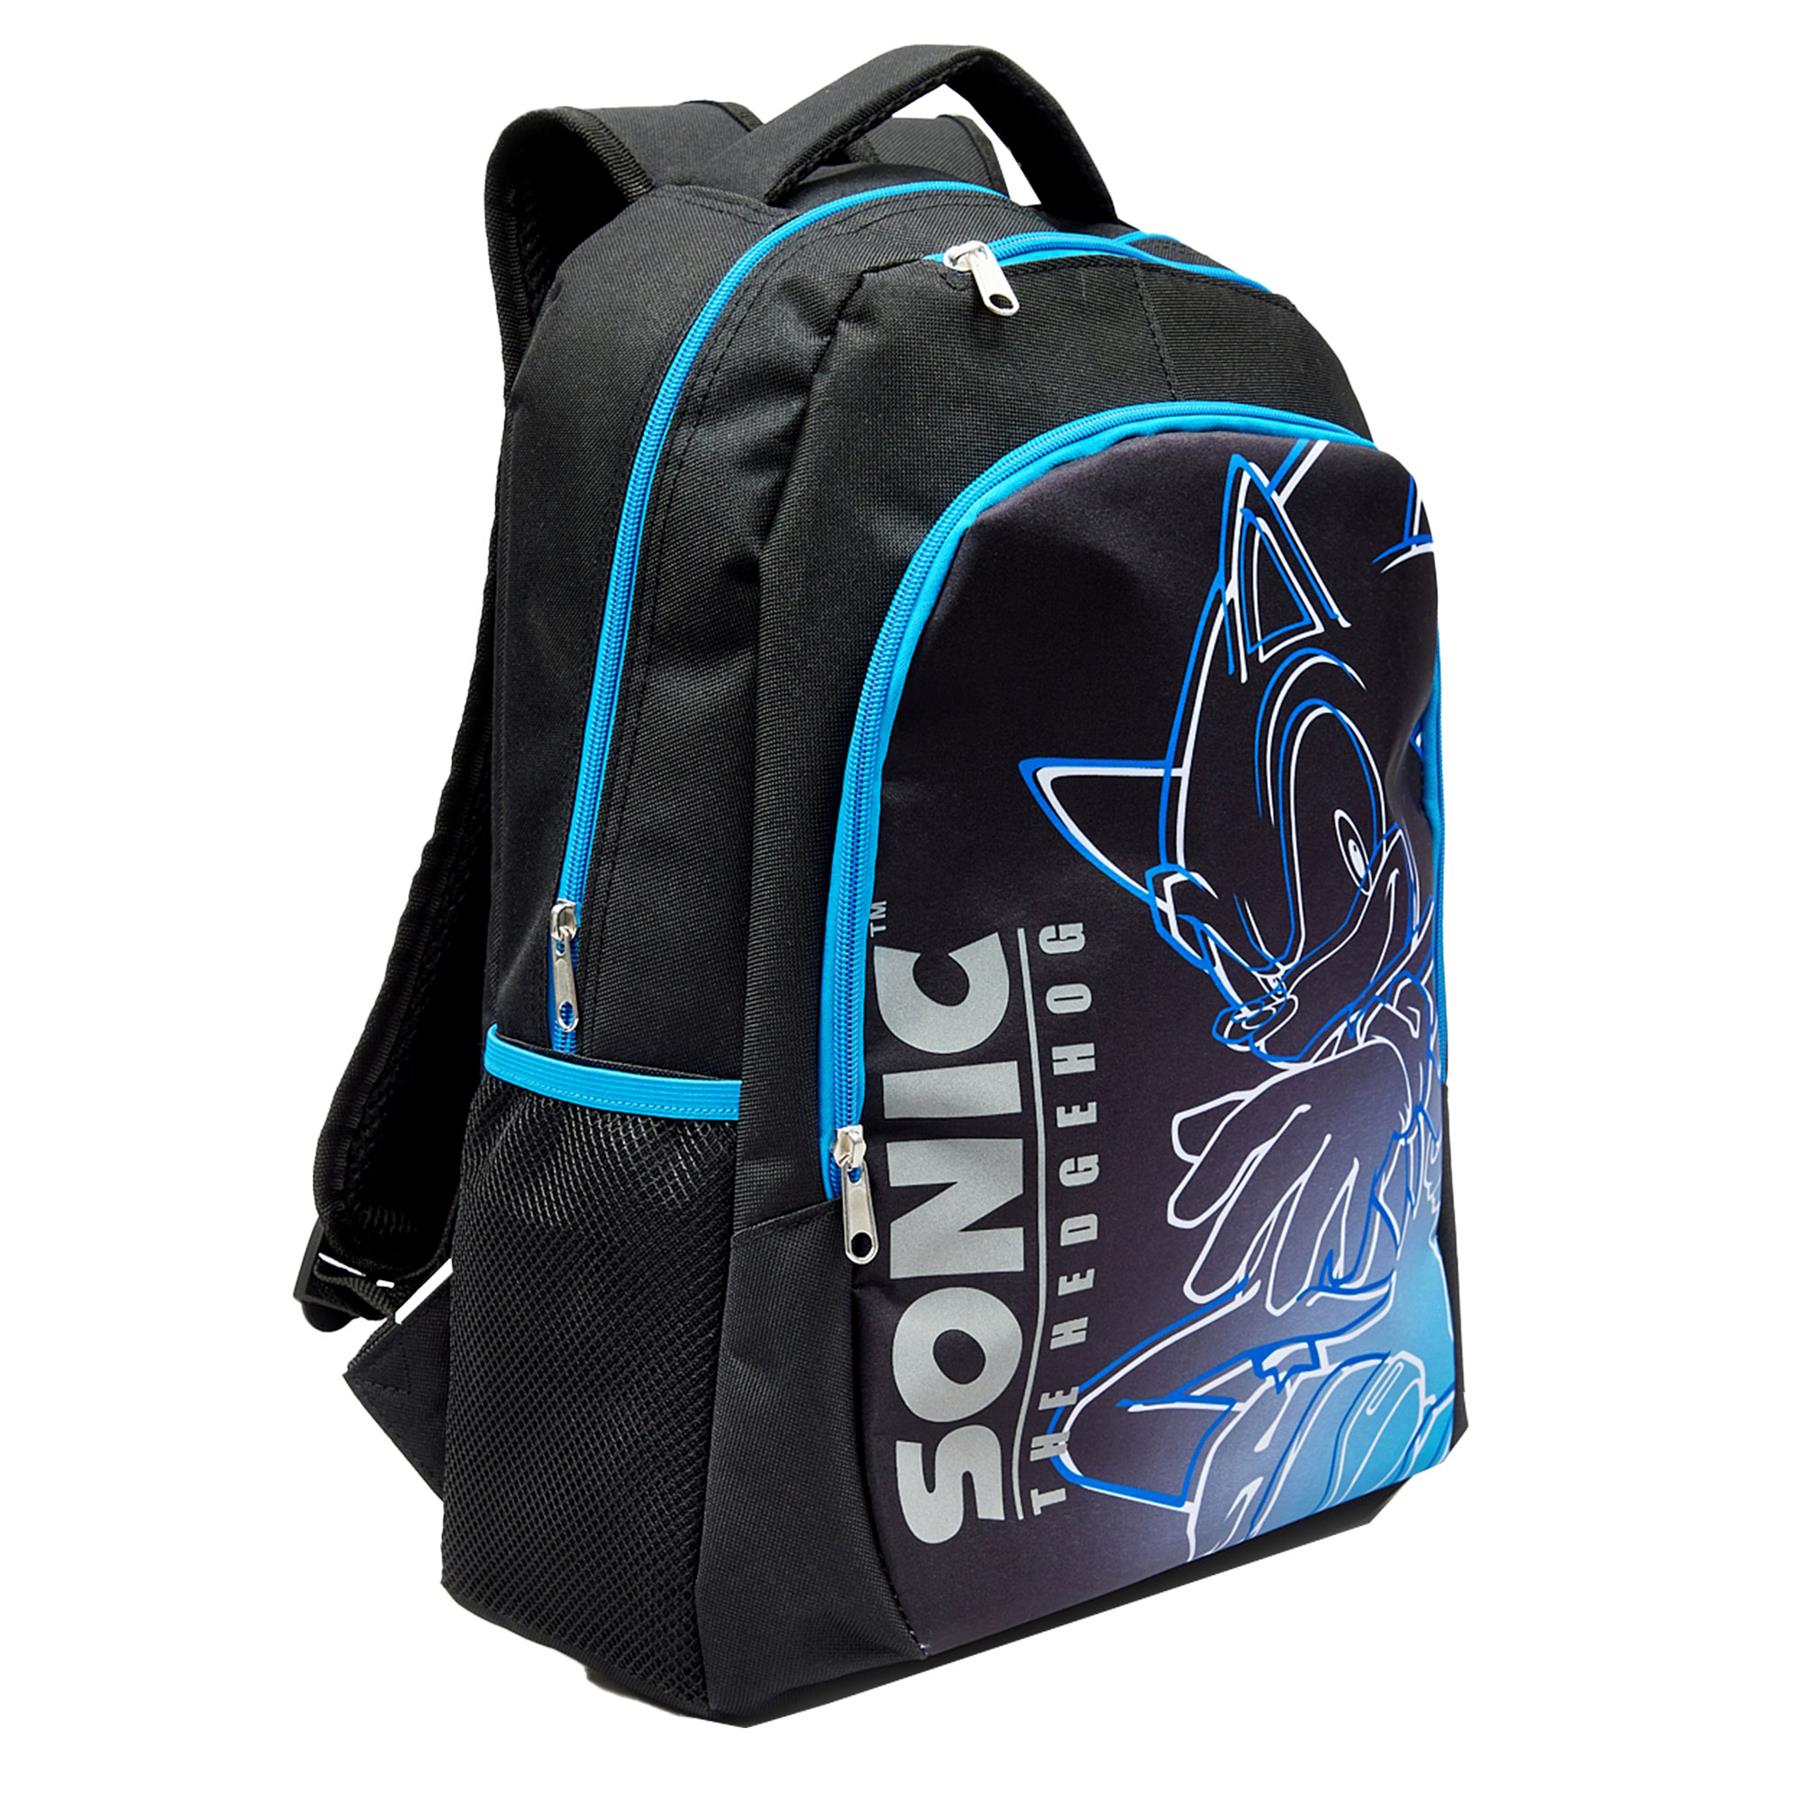 Kids Officially Licensed Sonic The Hedgehog Backpack Amazing School Travel Bag